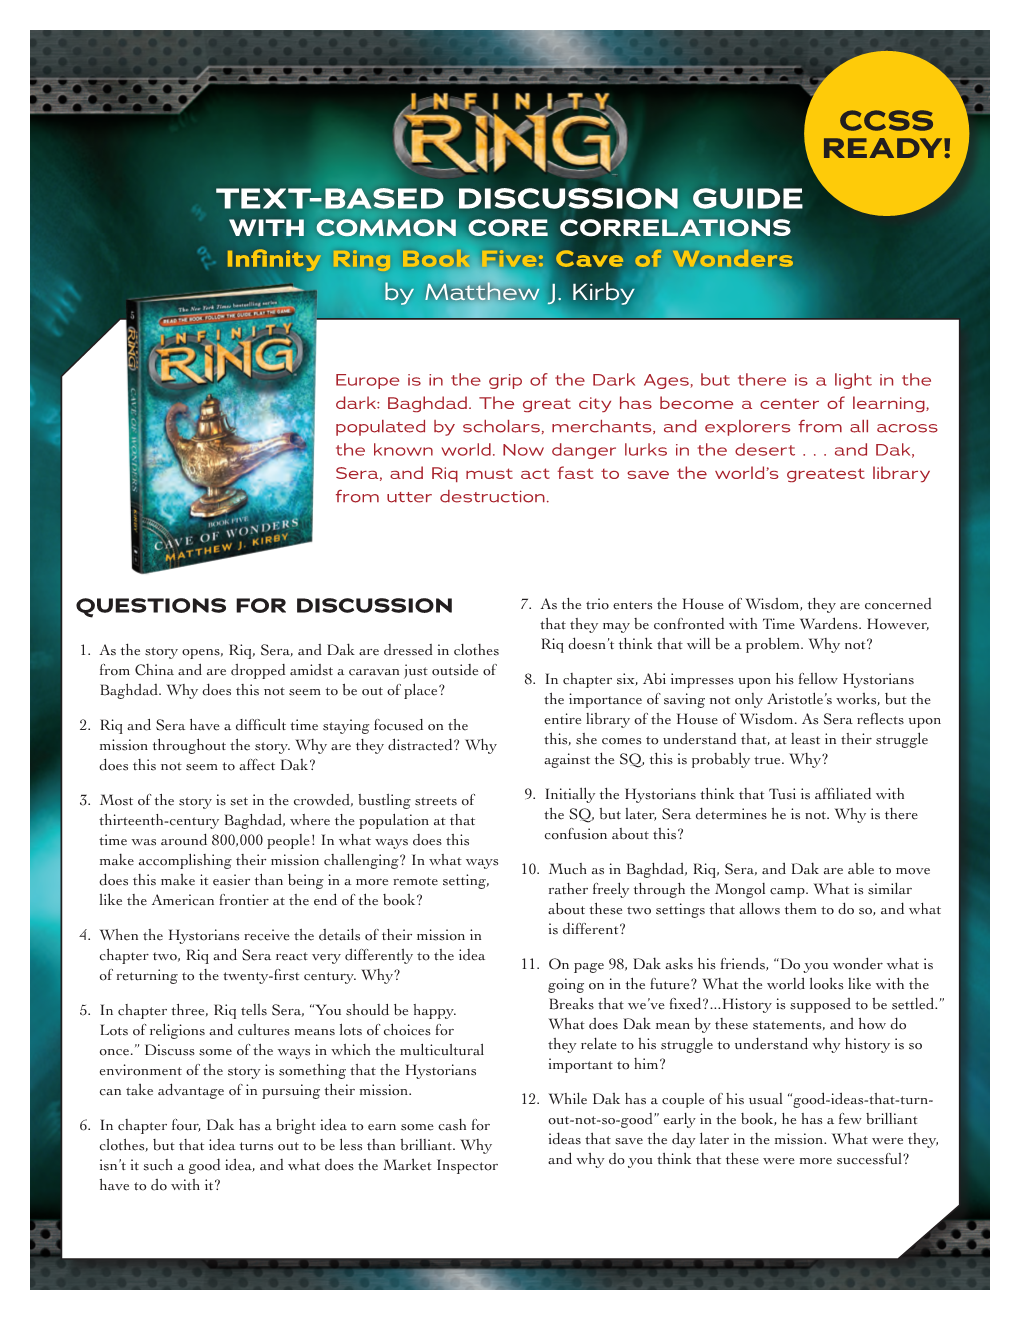 CCSS READY! TEXT-BASED DISCUSSION GUIDE with COMMON CORE CORRELATIONS Infinity Ring Book Five: Cave of Wonders by Matthew J